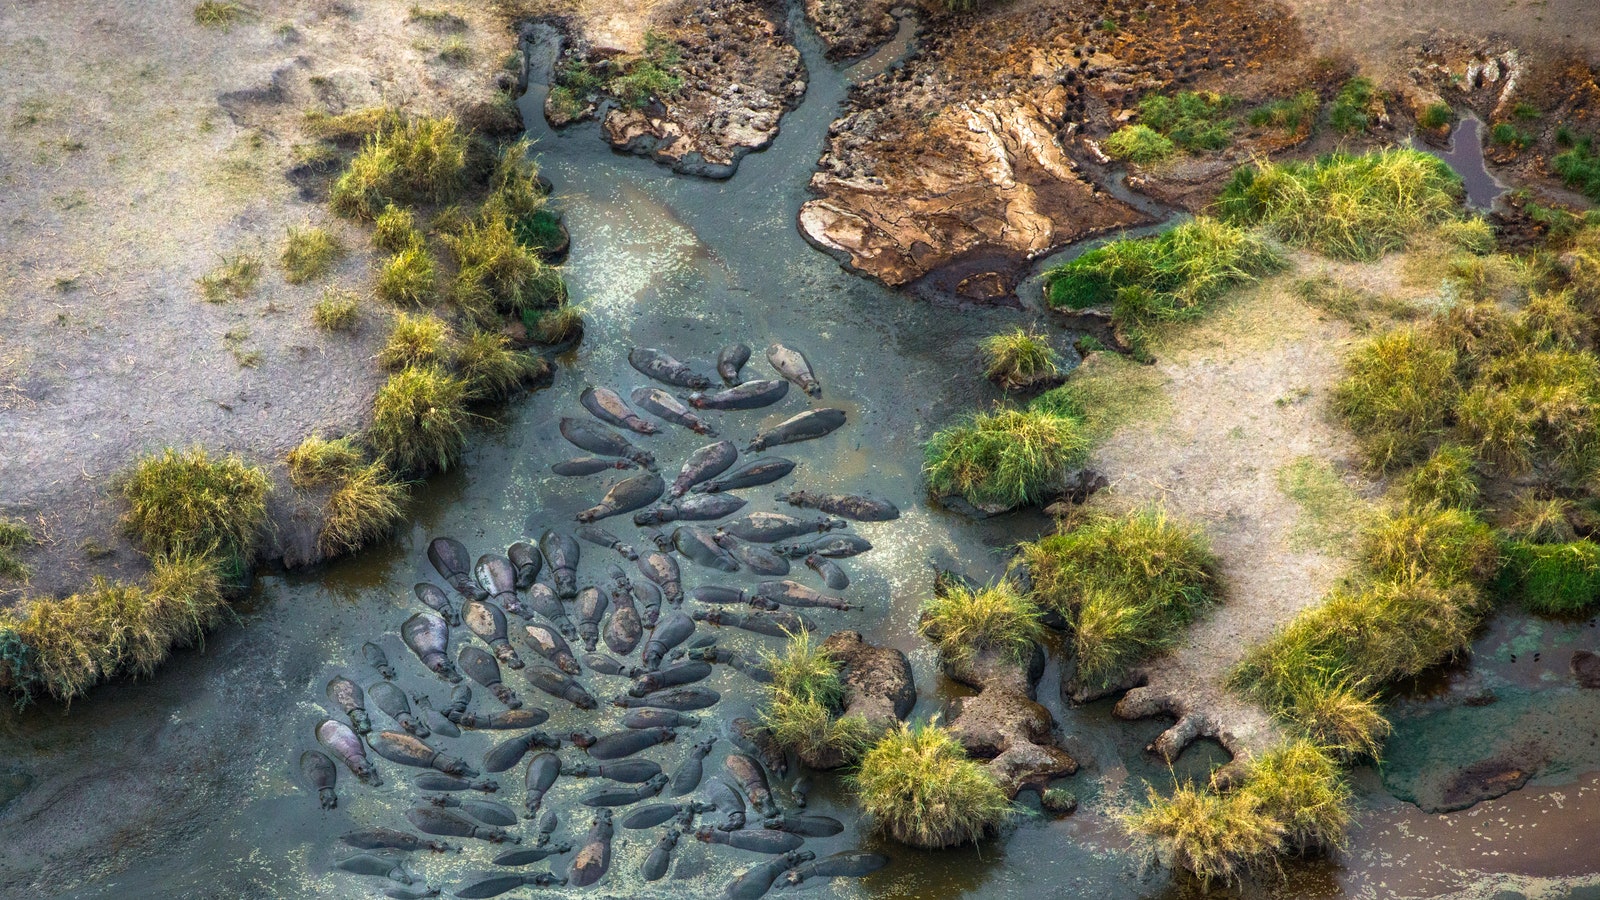 A group of hippopotamus from above Serengeti National Park.